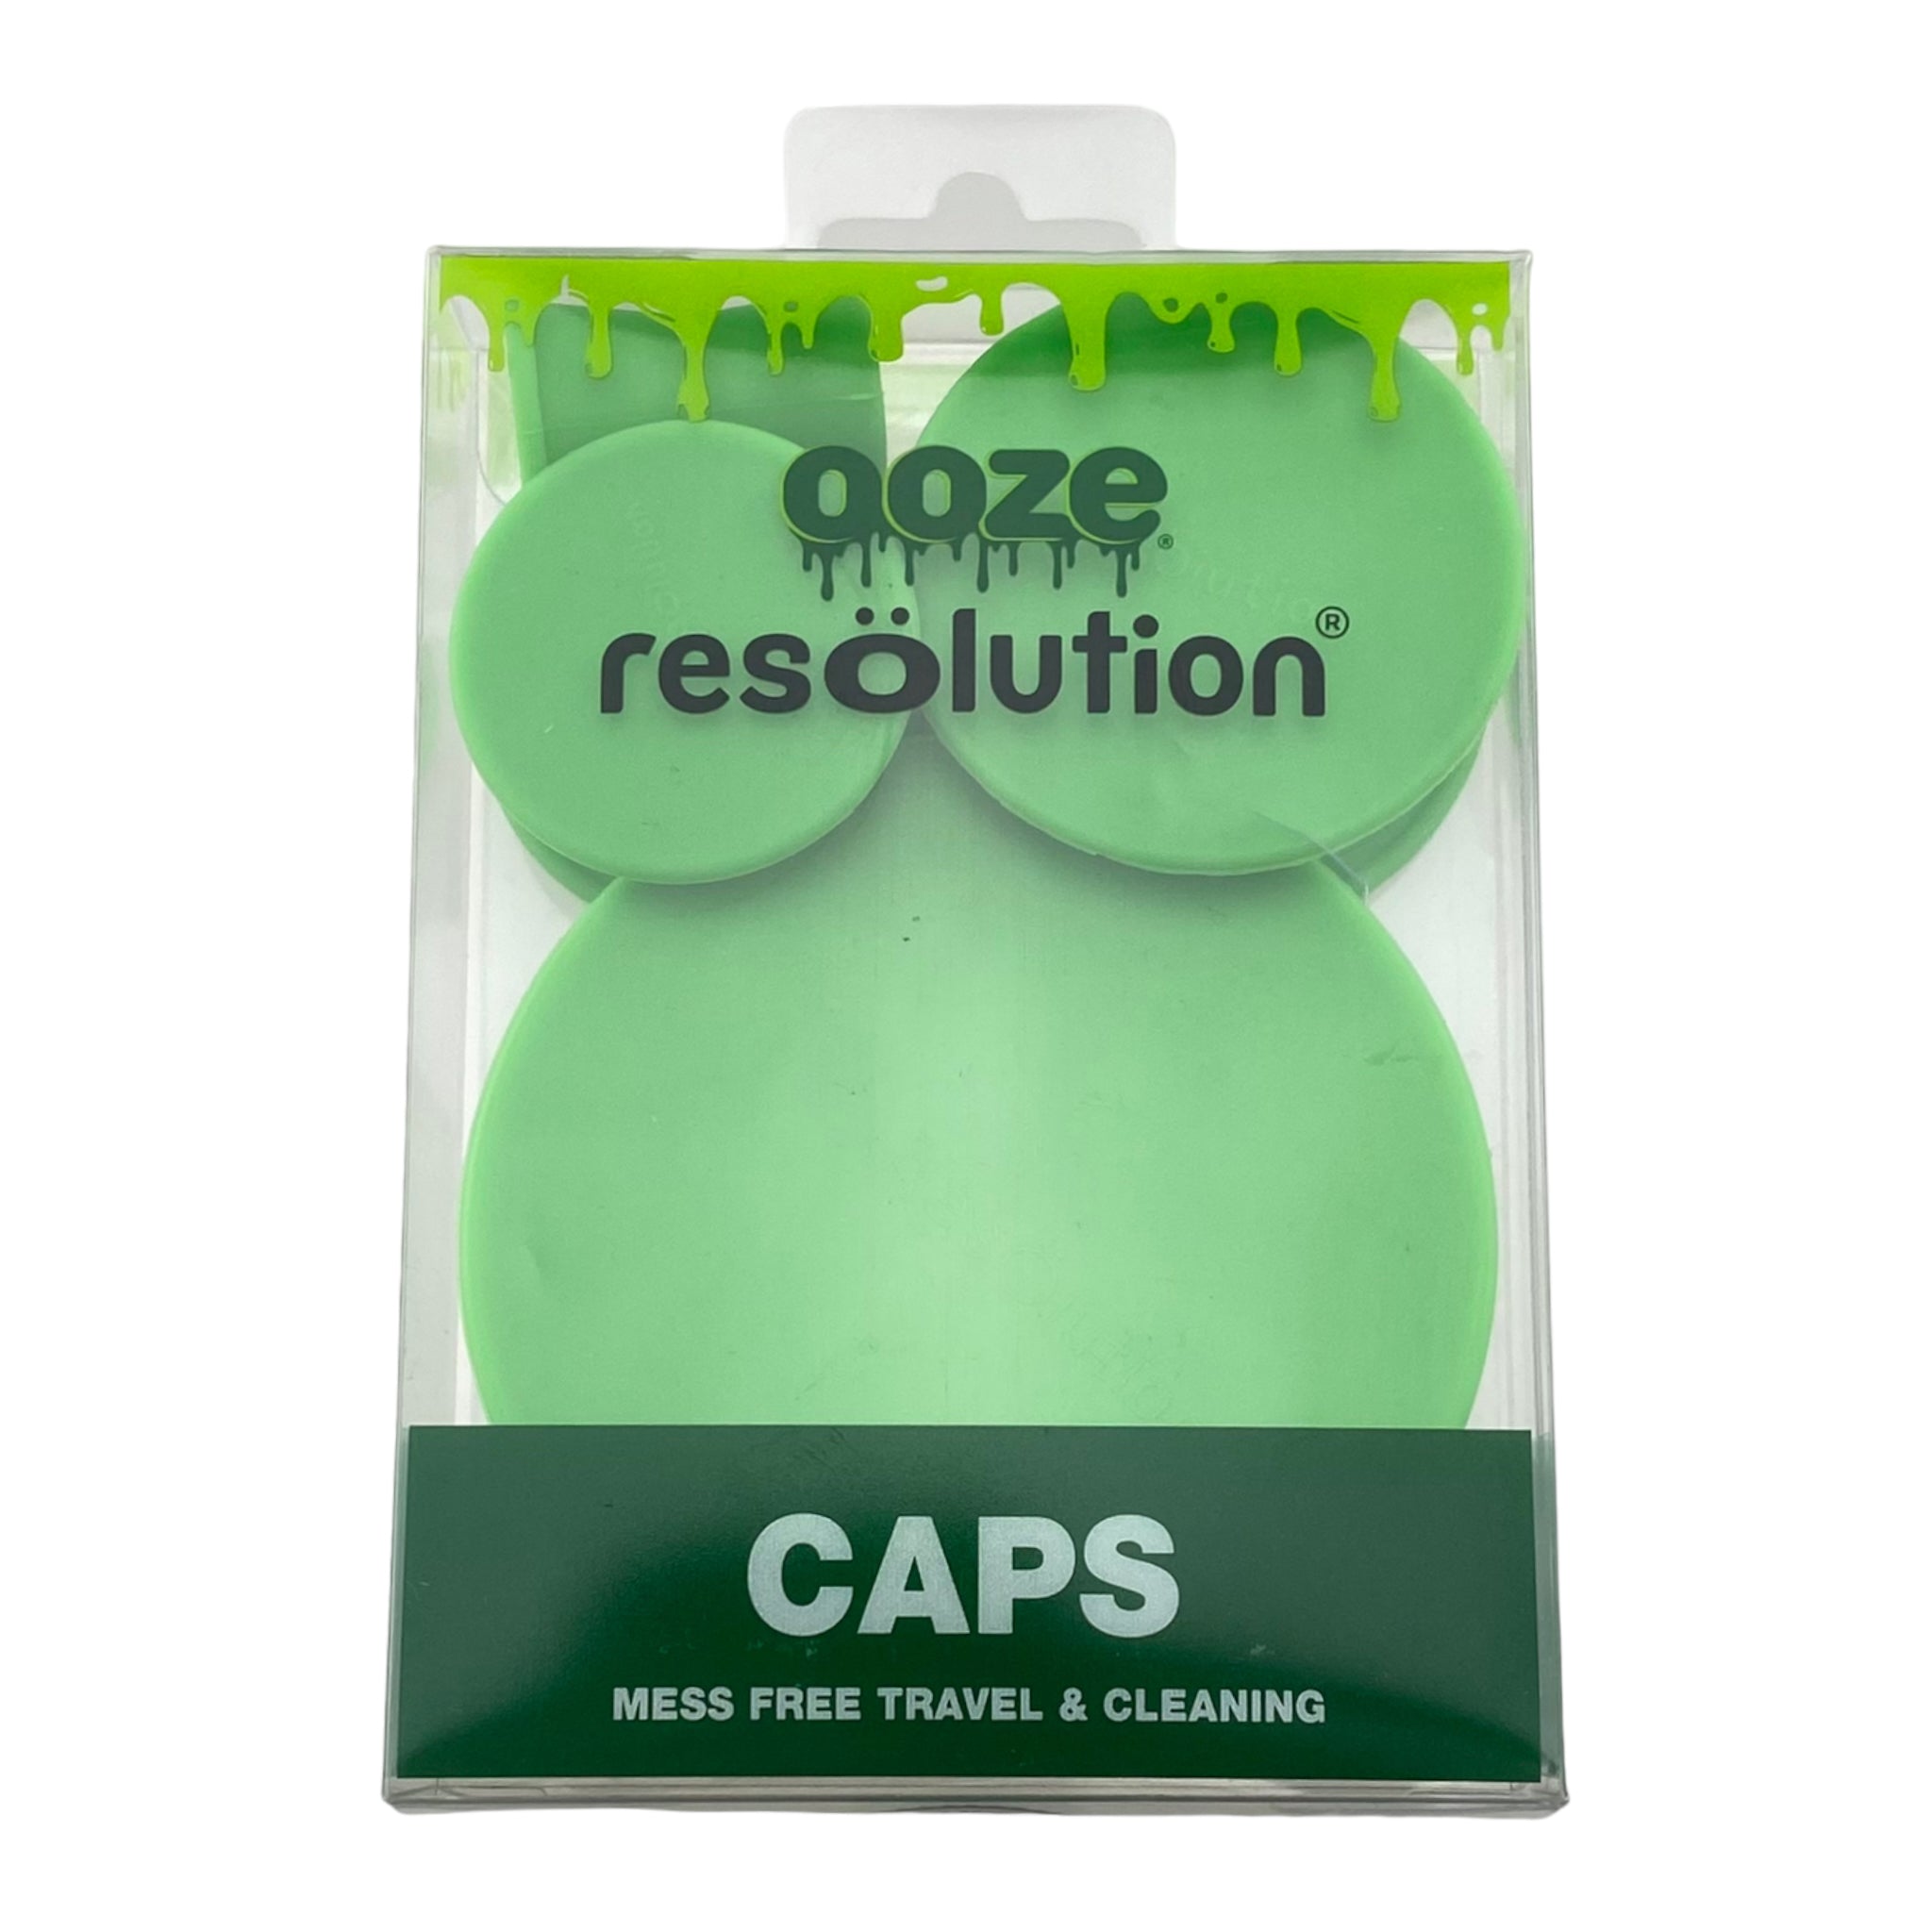 Ooze Resolution Silicone Res Caps For Cleaning Bongs And Dab Rigs - Green